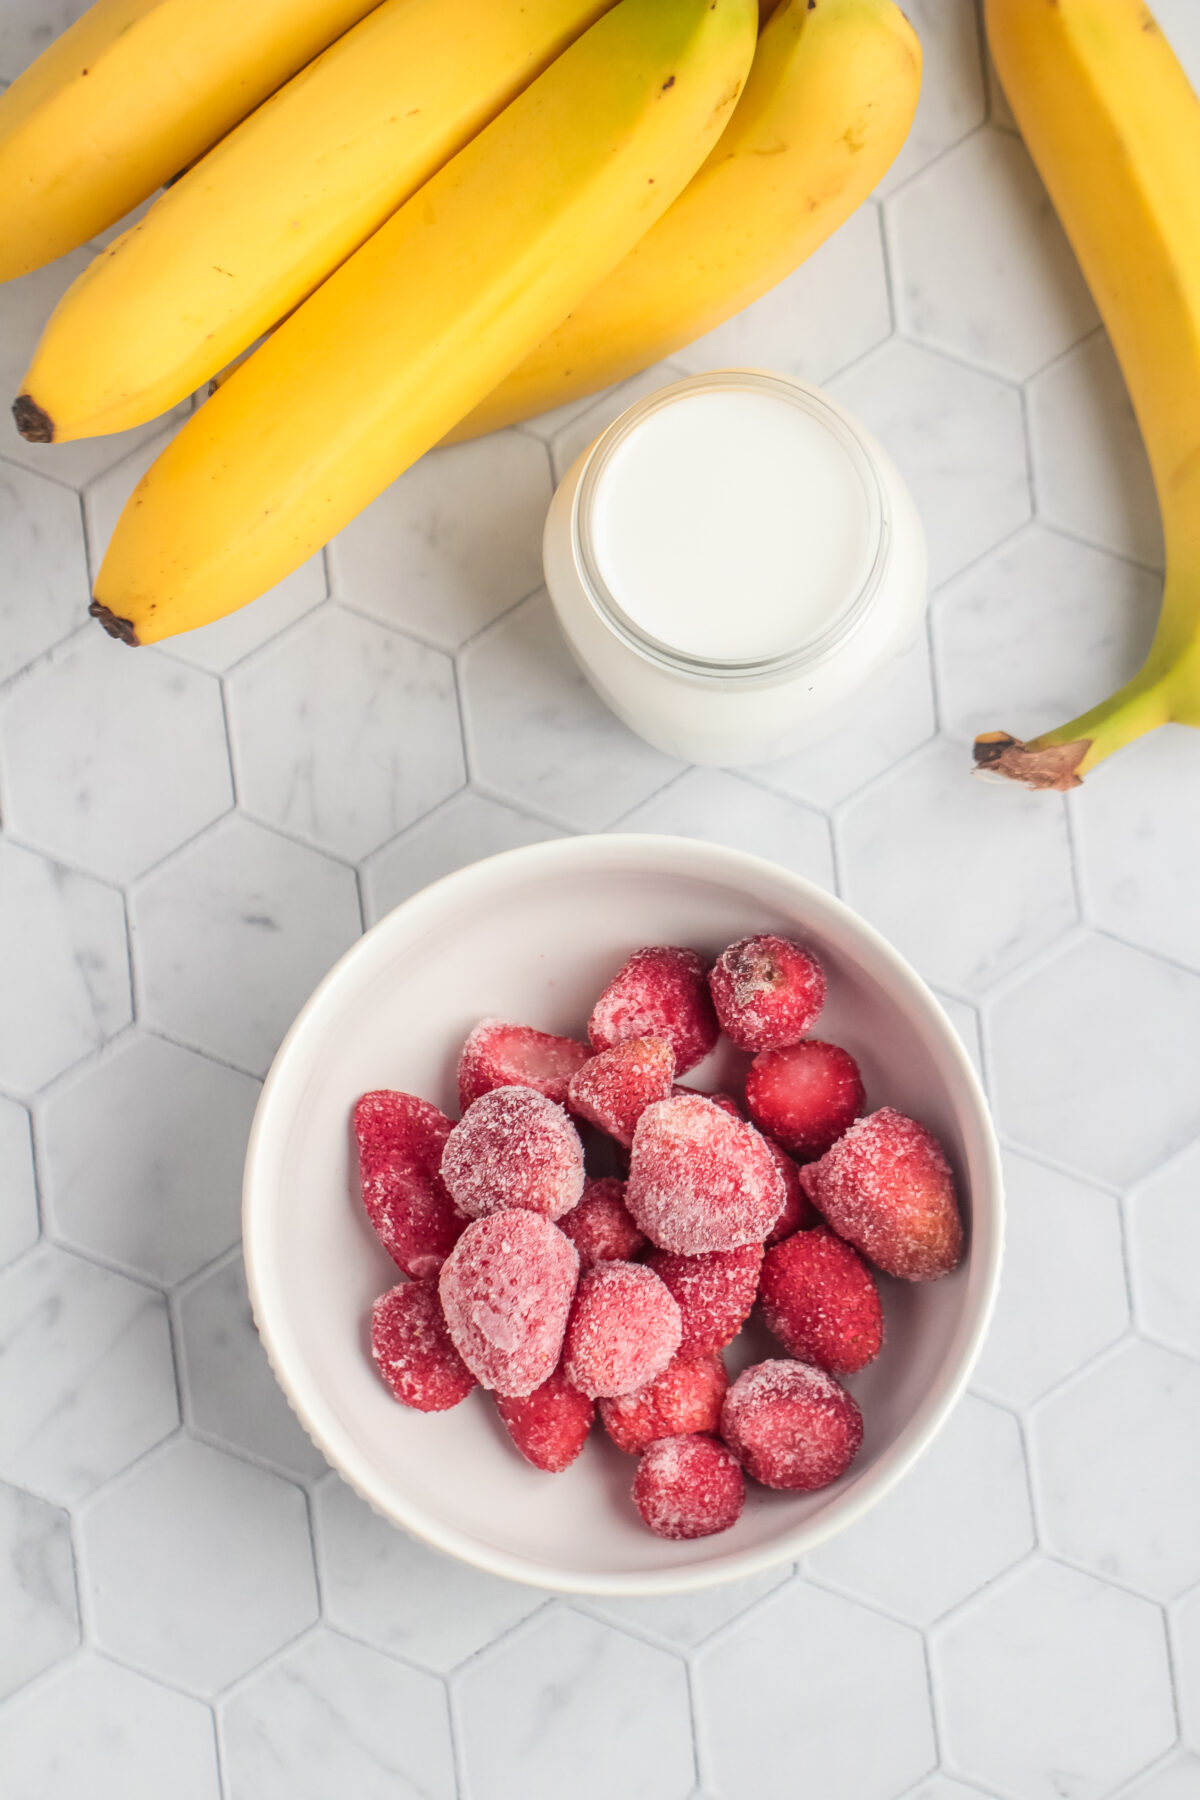 Ingredients for Strawberry Banana Coconut Smoothie